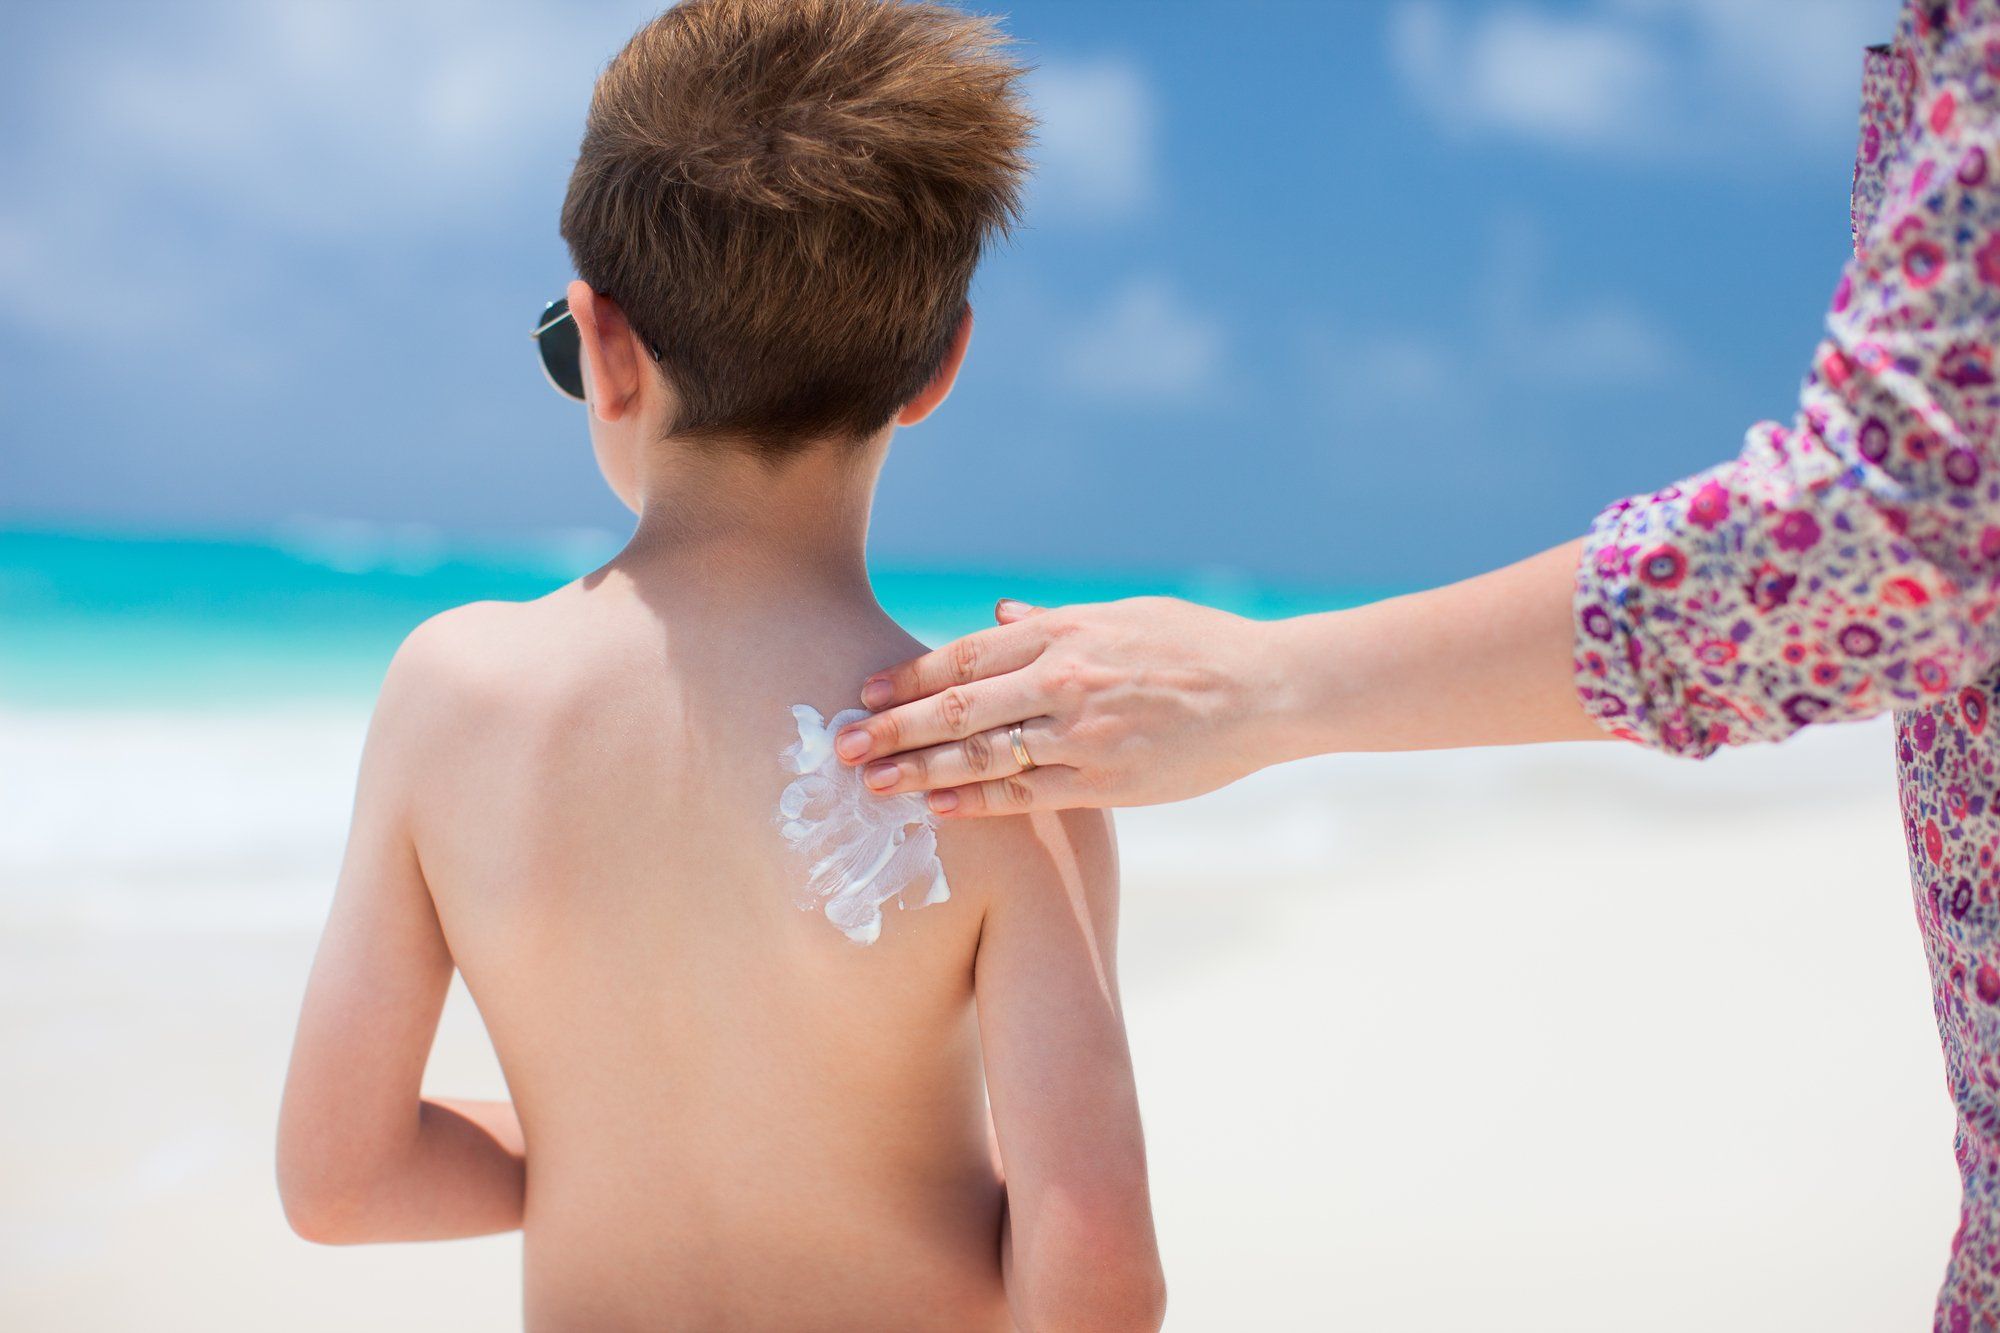 Blue Lizard Mineral-Based Sunblock for Kids Contains Chemicals, Class Action Alleges